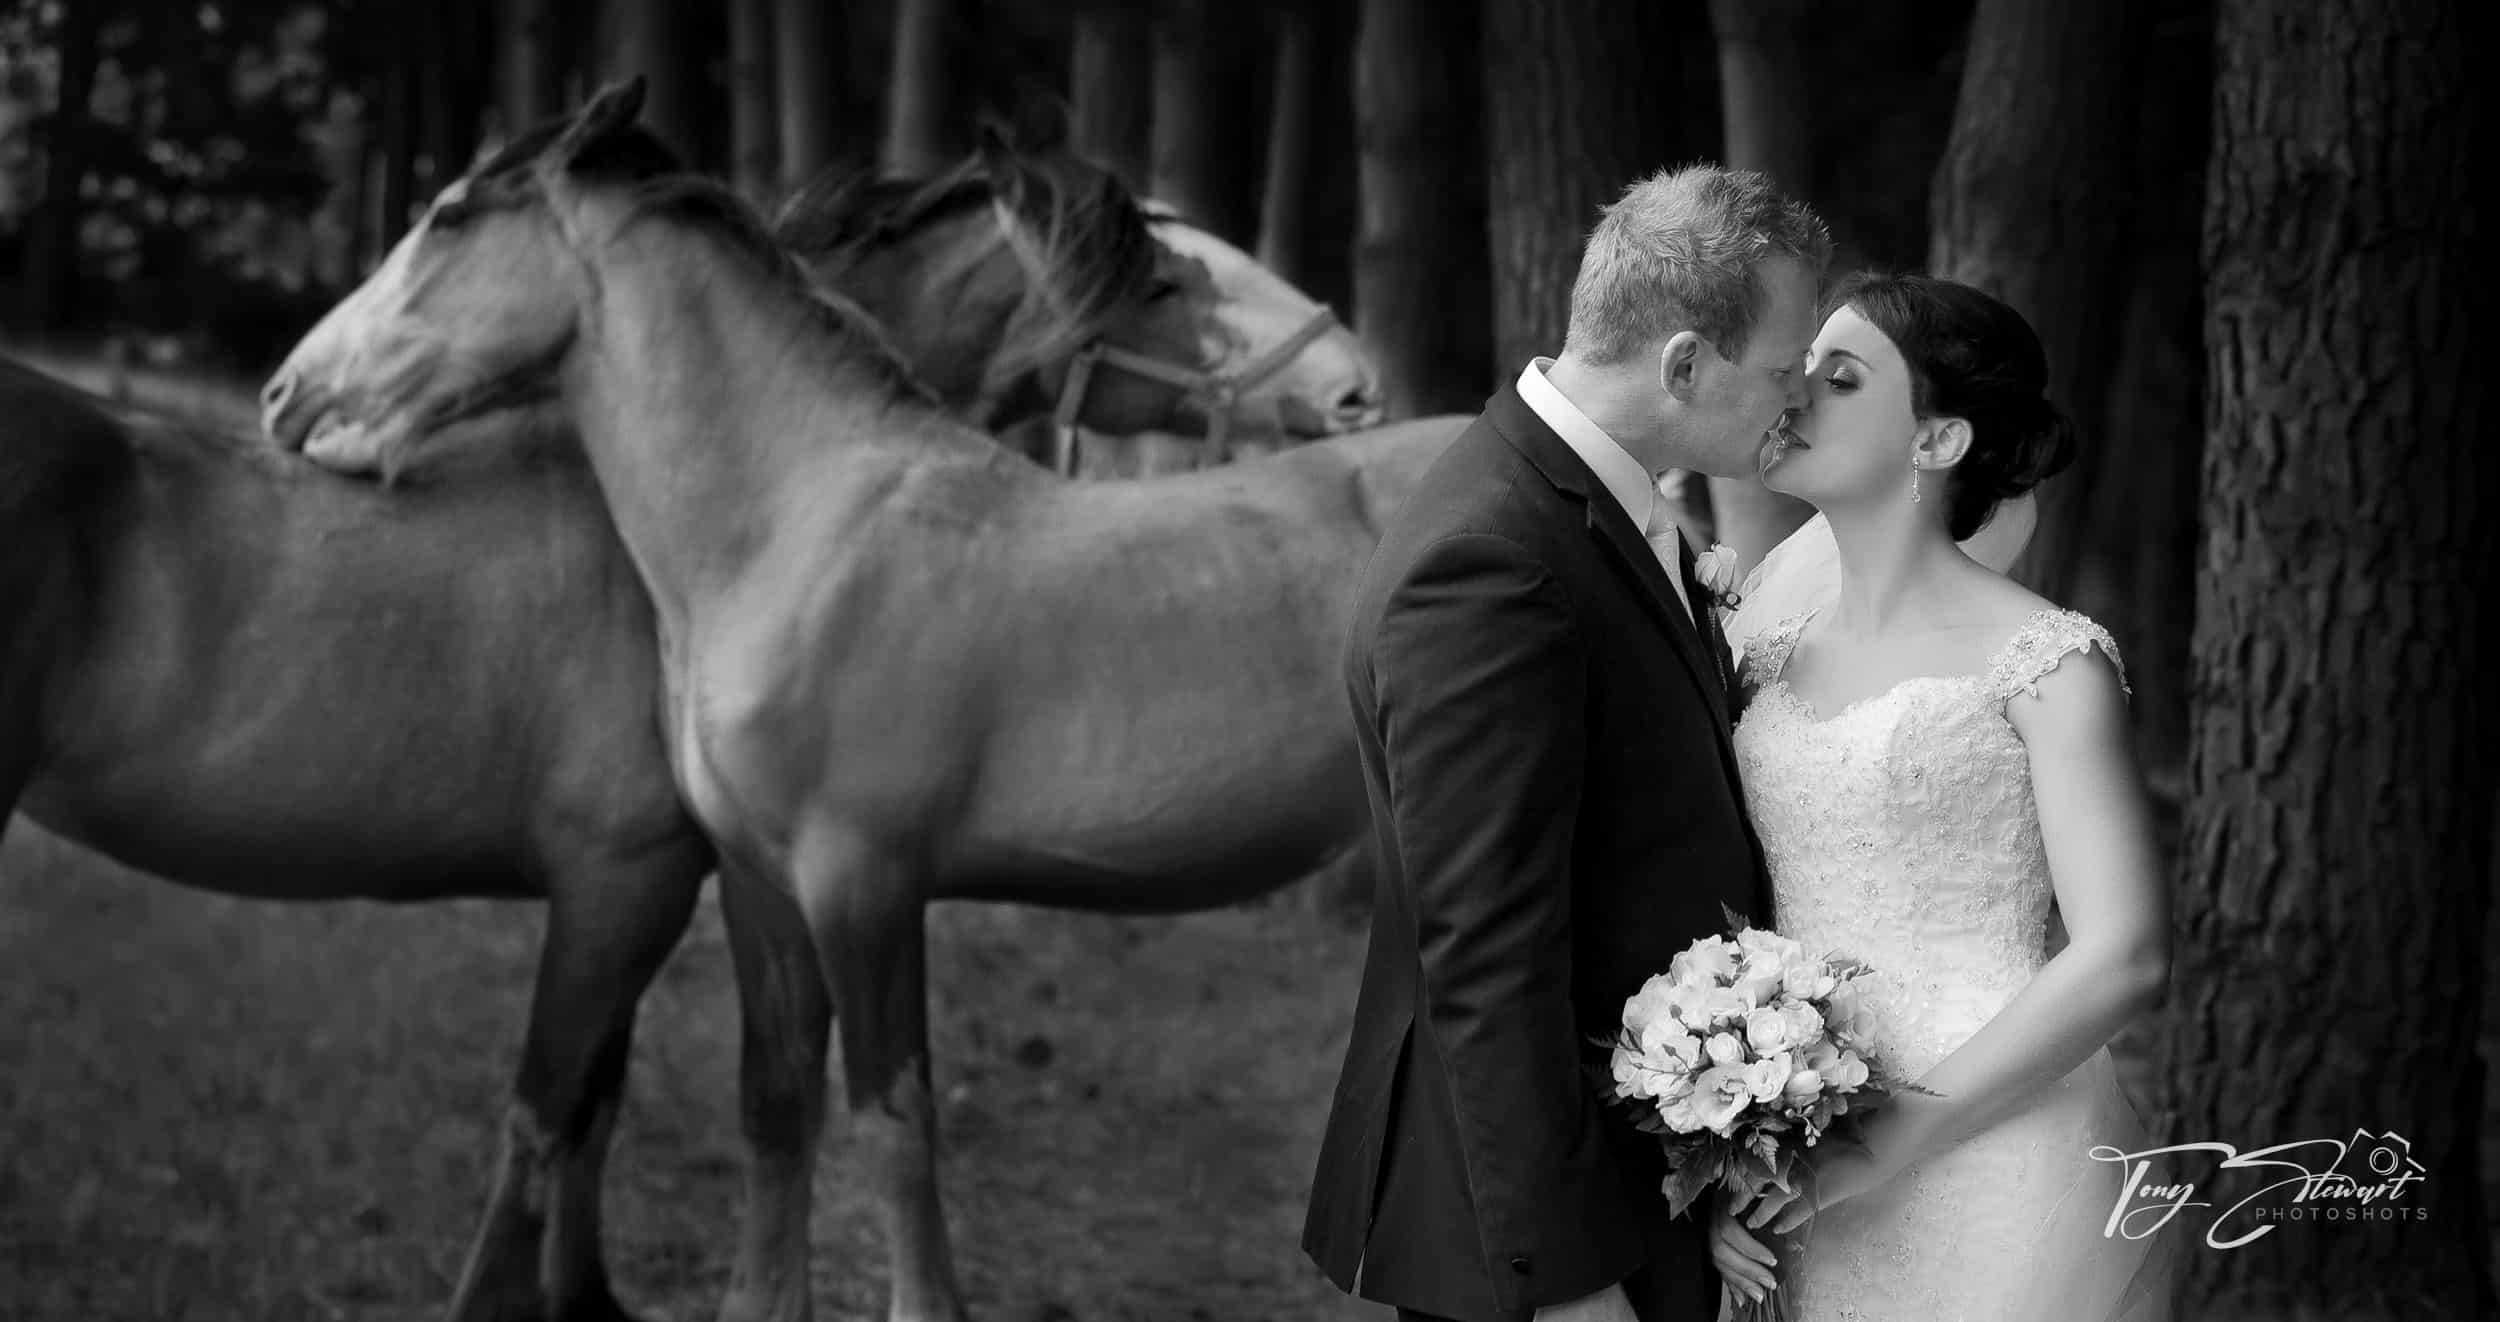 Couple kiss by two horses, Trents Vineyard, Canterbury.